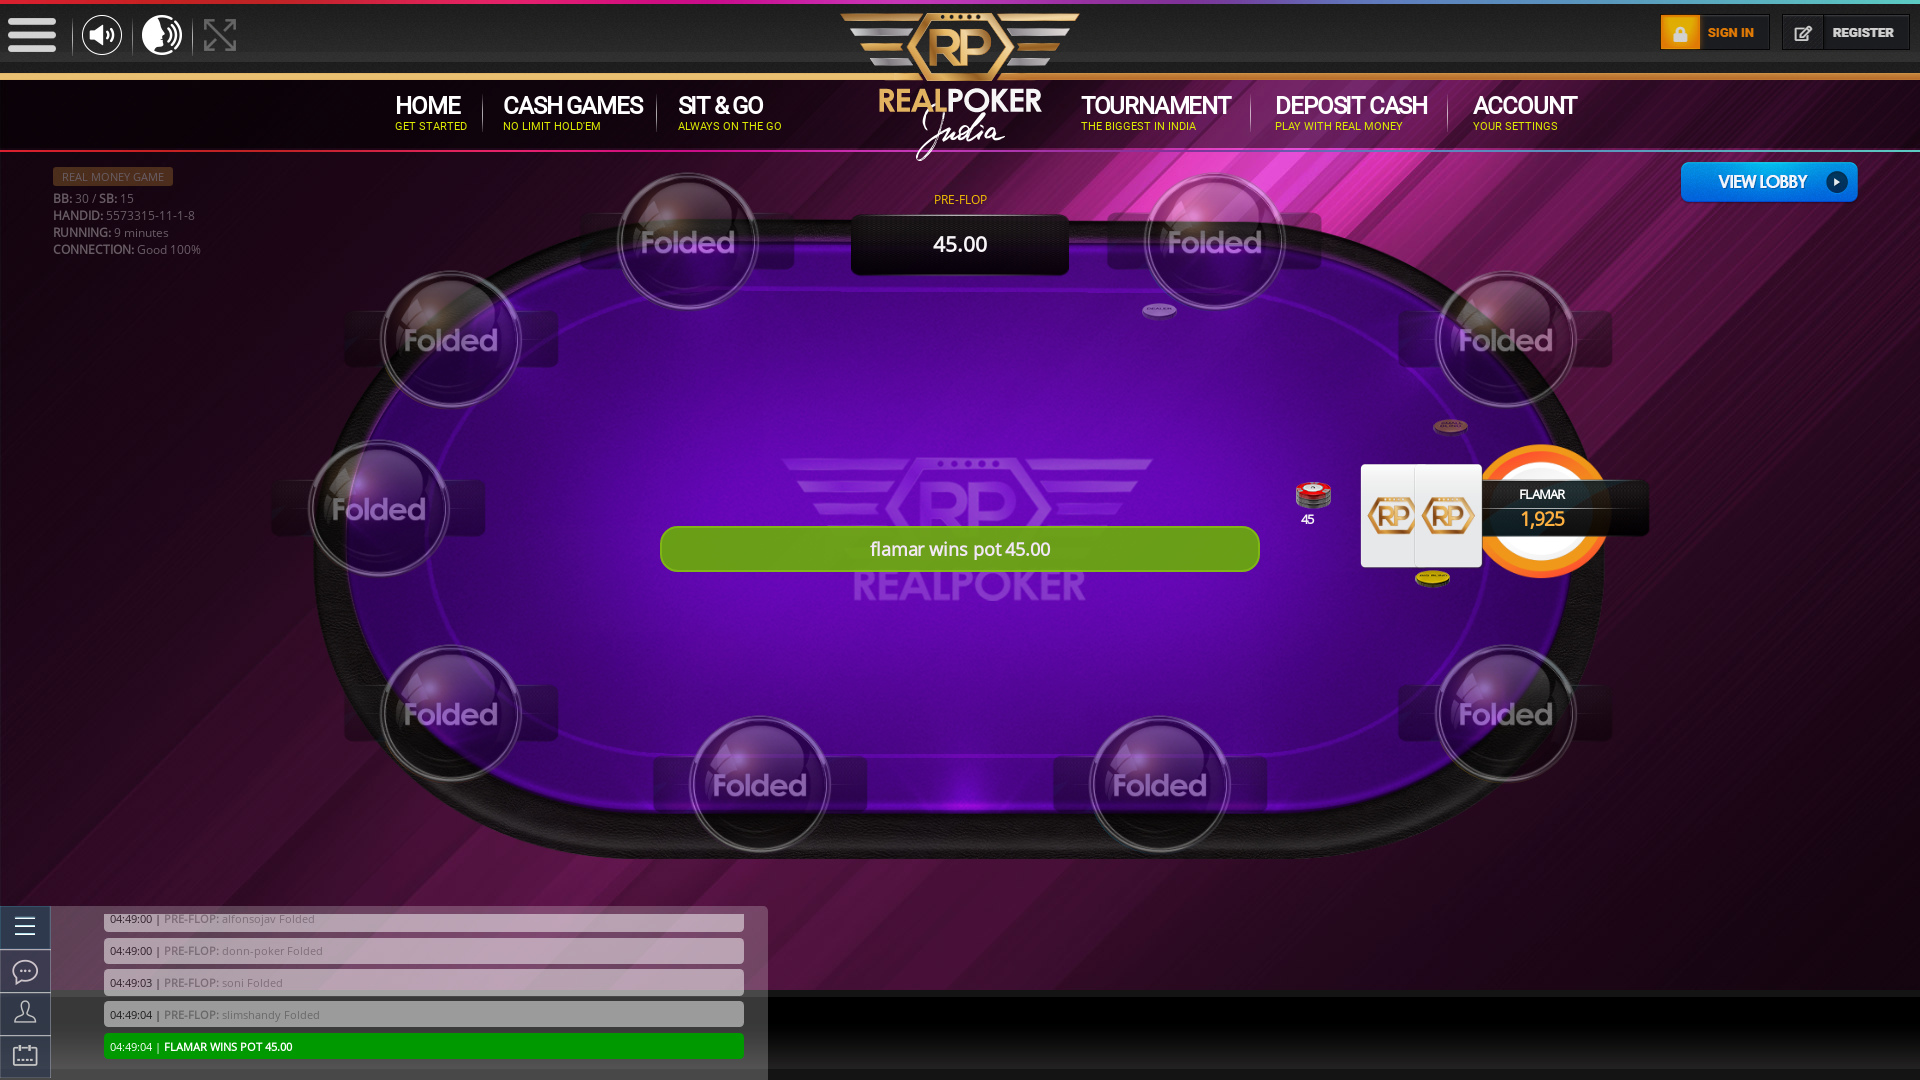 Real poker 10 player table in the 9th minute of the match